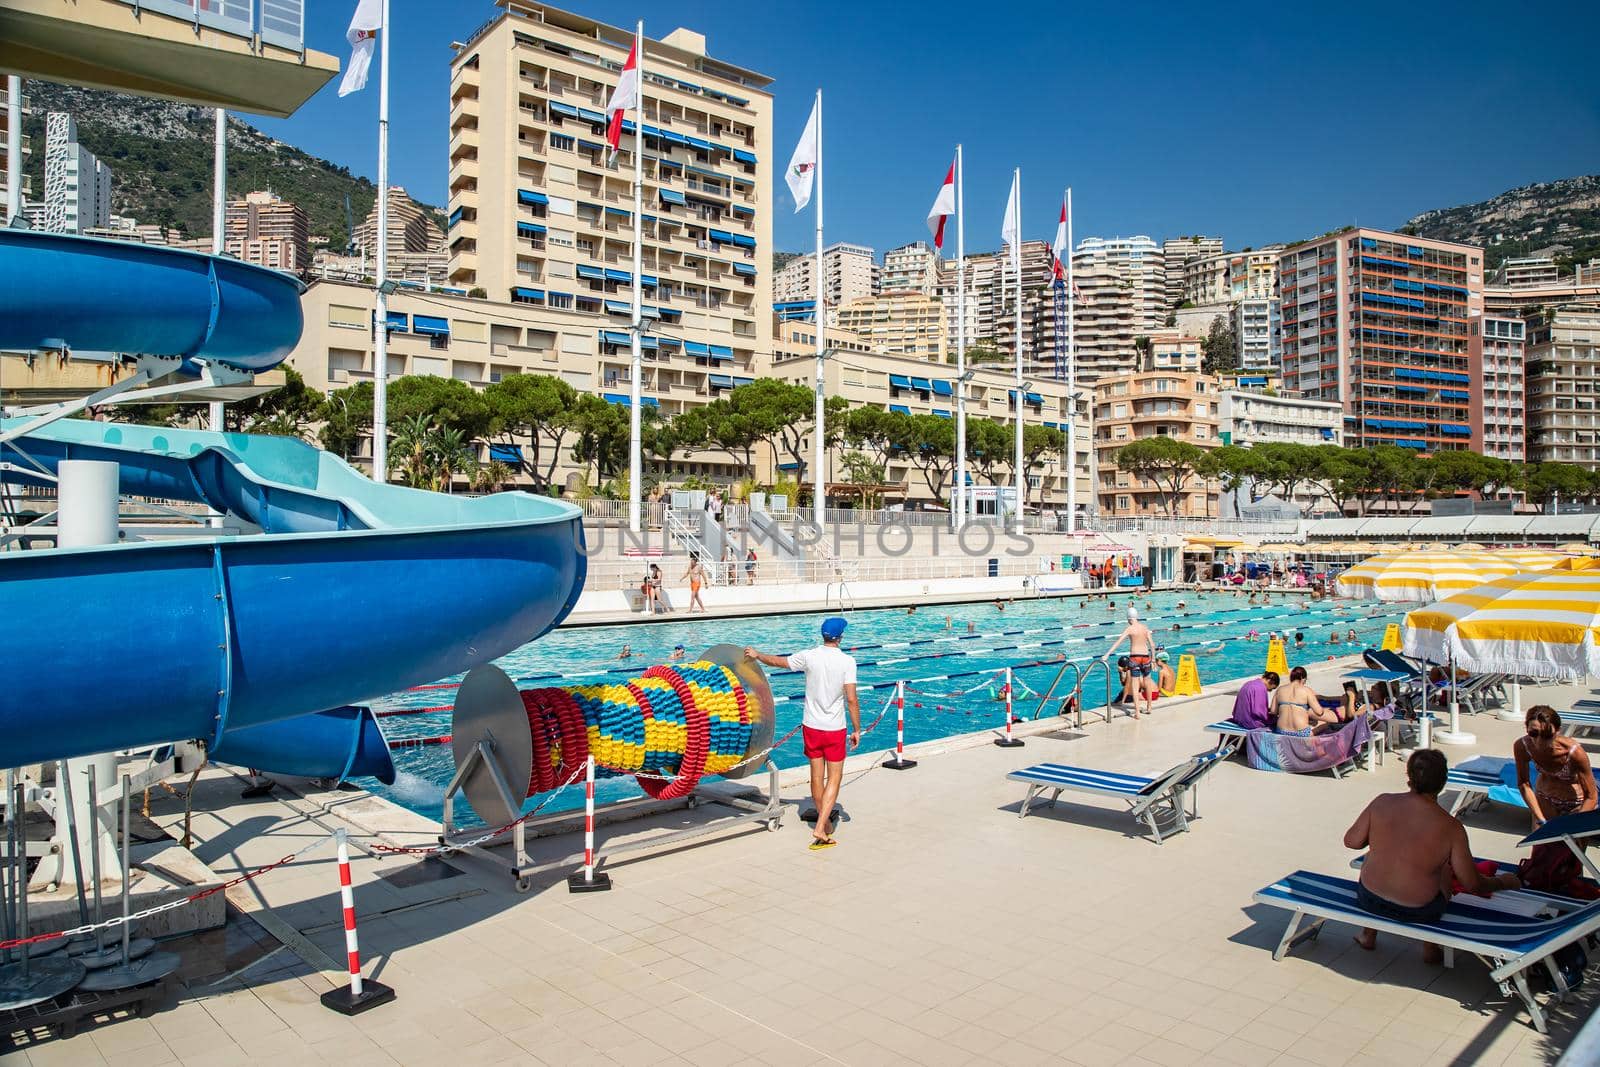 Monaco, Monte-Carlo, 06 August 2018: The famous pool in port Hercules, is the parked boats, sunny day, a lot of people, Children and elderly people, many yachts and boats, Prince's Palace, megayachts by vladimirdrozdin